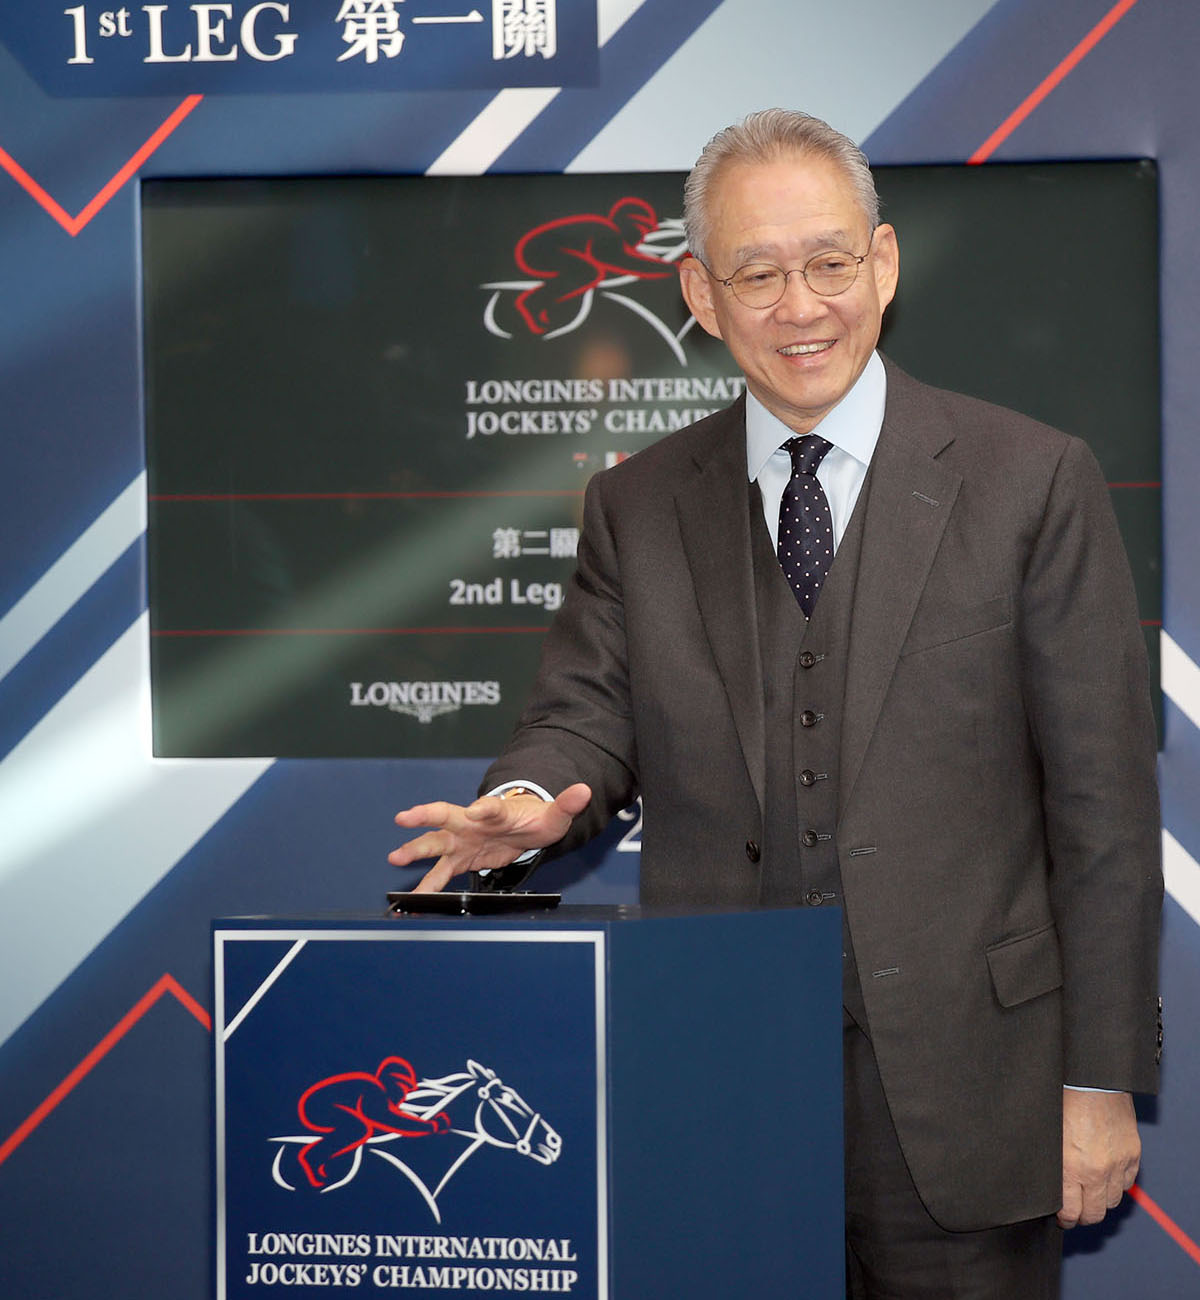 Club’s Chairman, Anthony Chow starts allocation of jockeys for the first leg.